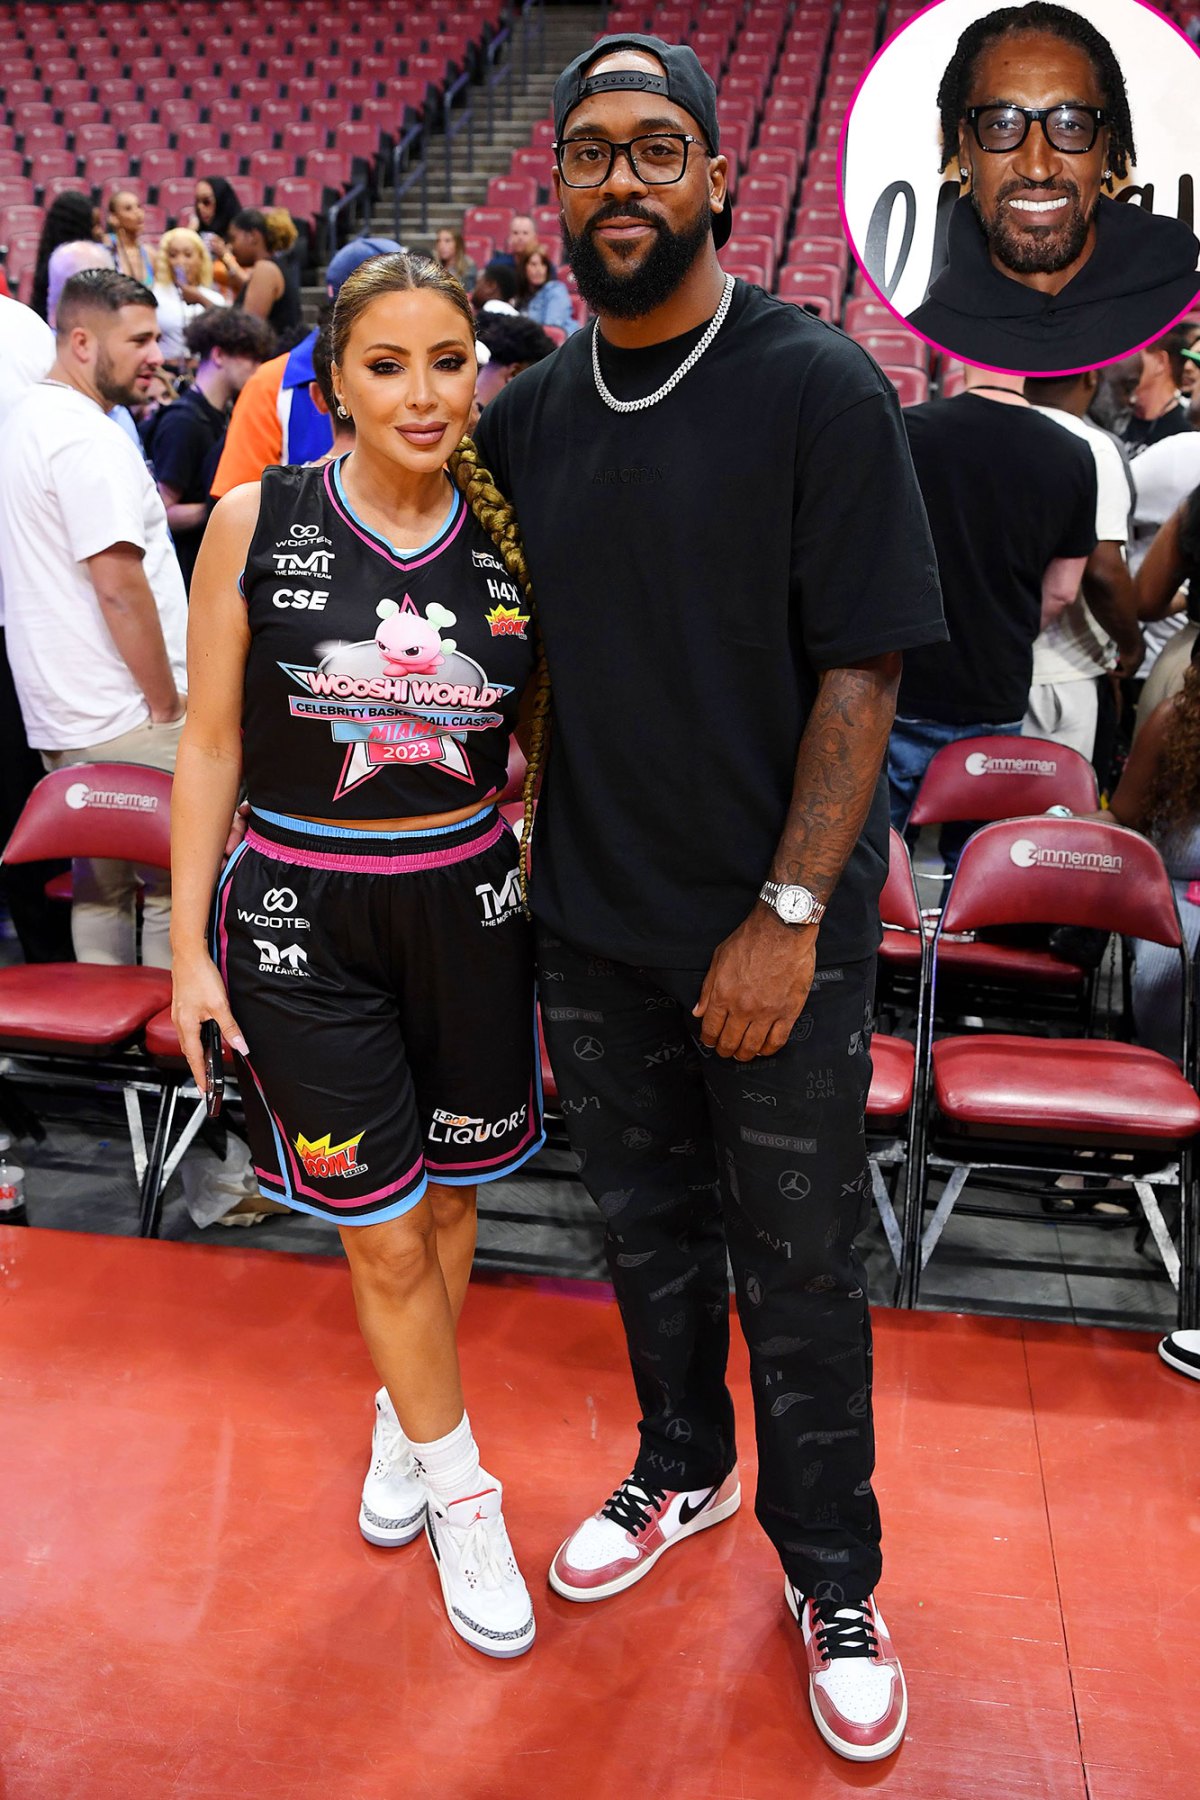 RHOM: Larsa Pippen on Marcus Jordan, Where She Stands with Scottie